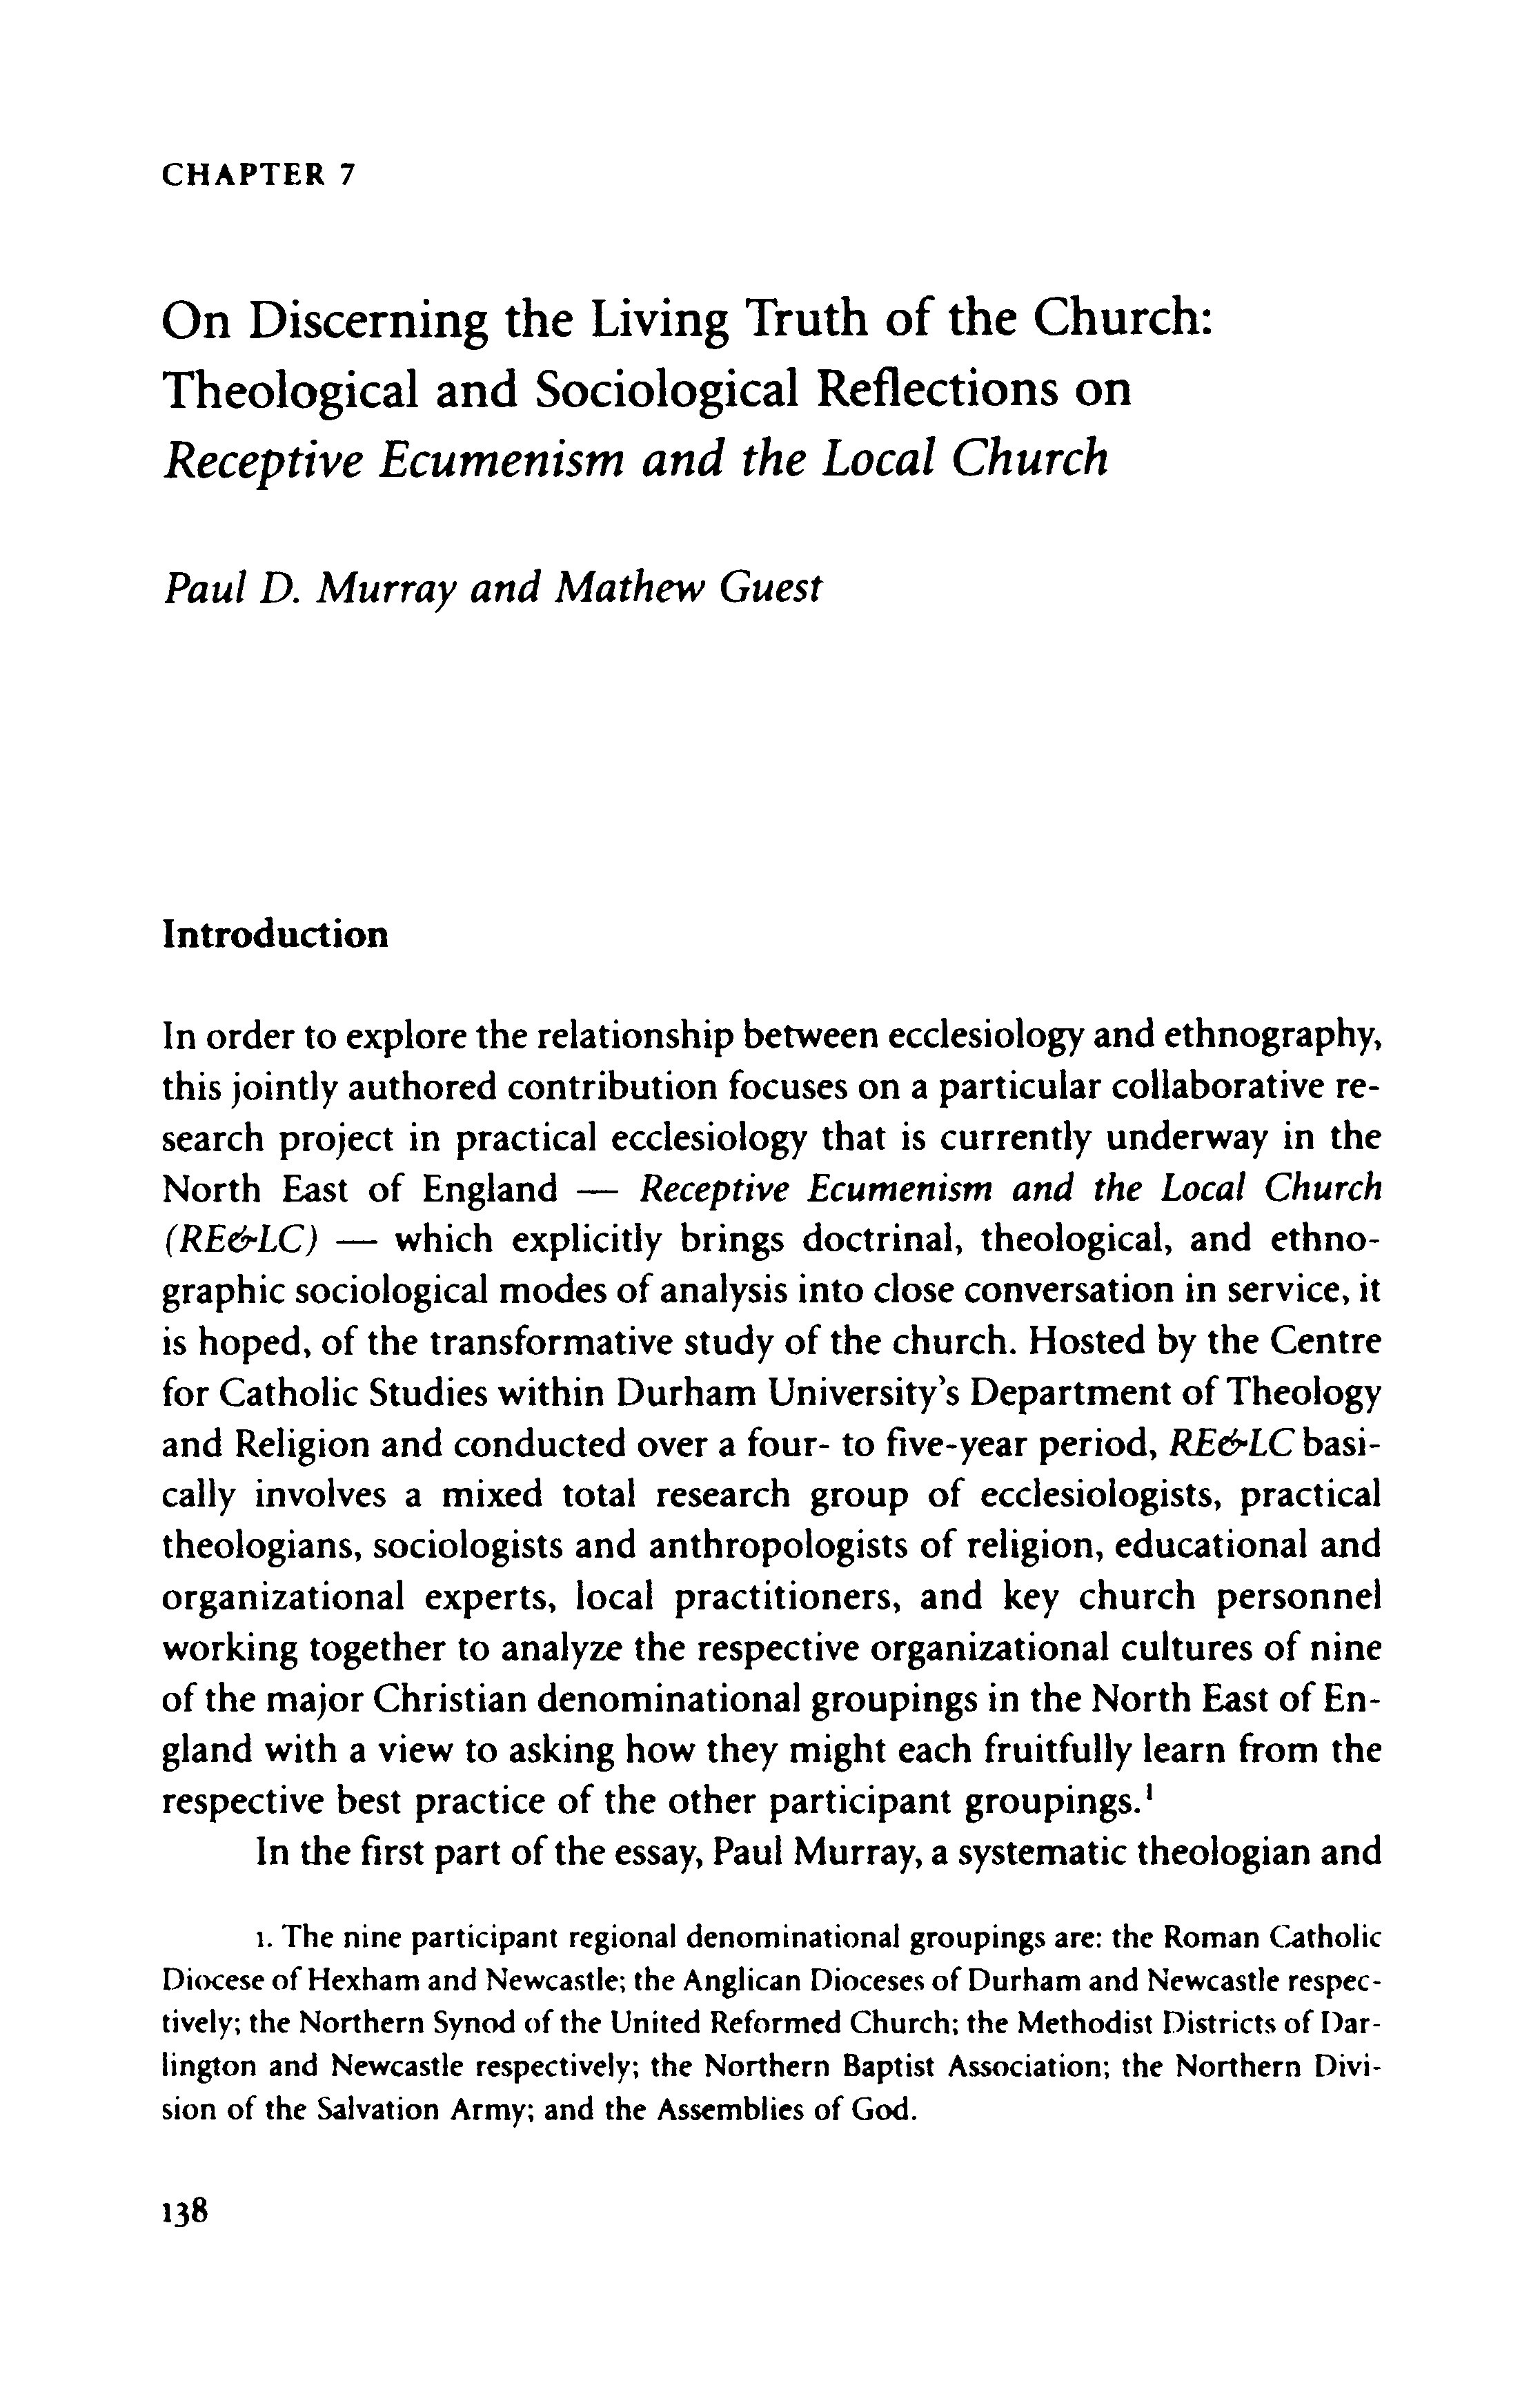 On Discerning the Living Truth of the Church: Theological and Sociological Reflections on Receptive Ecumenism and the Local Church Thumbnail